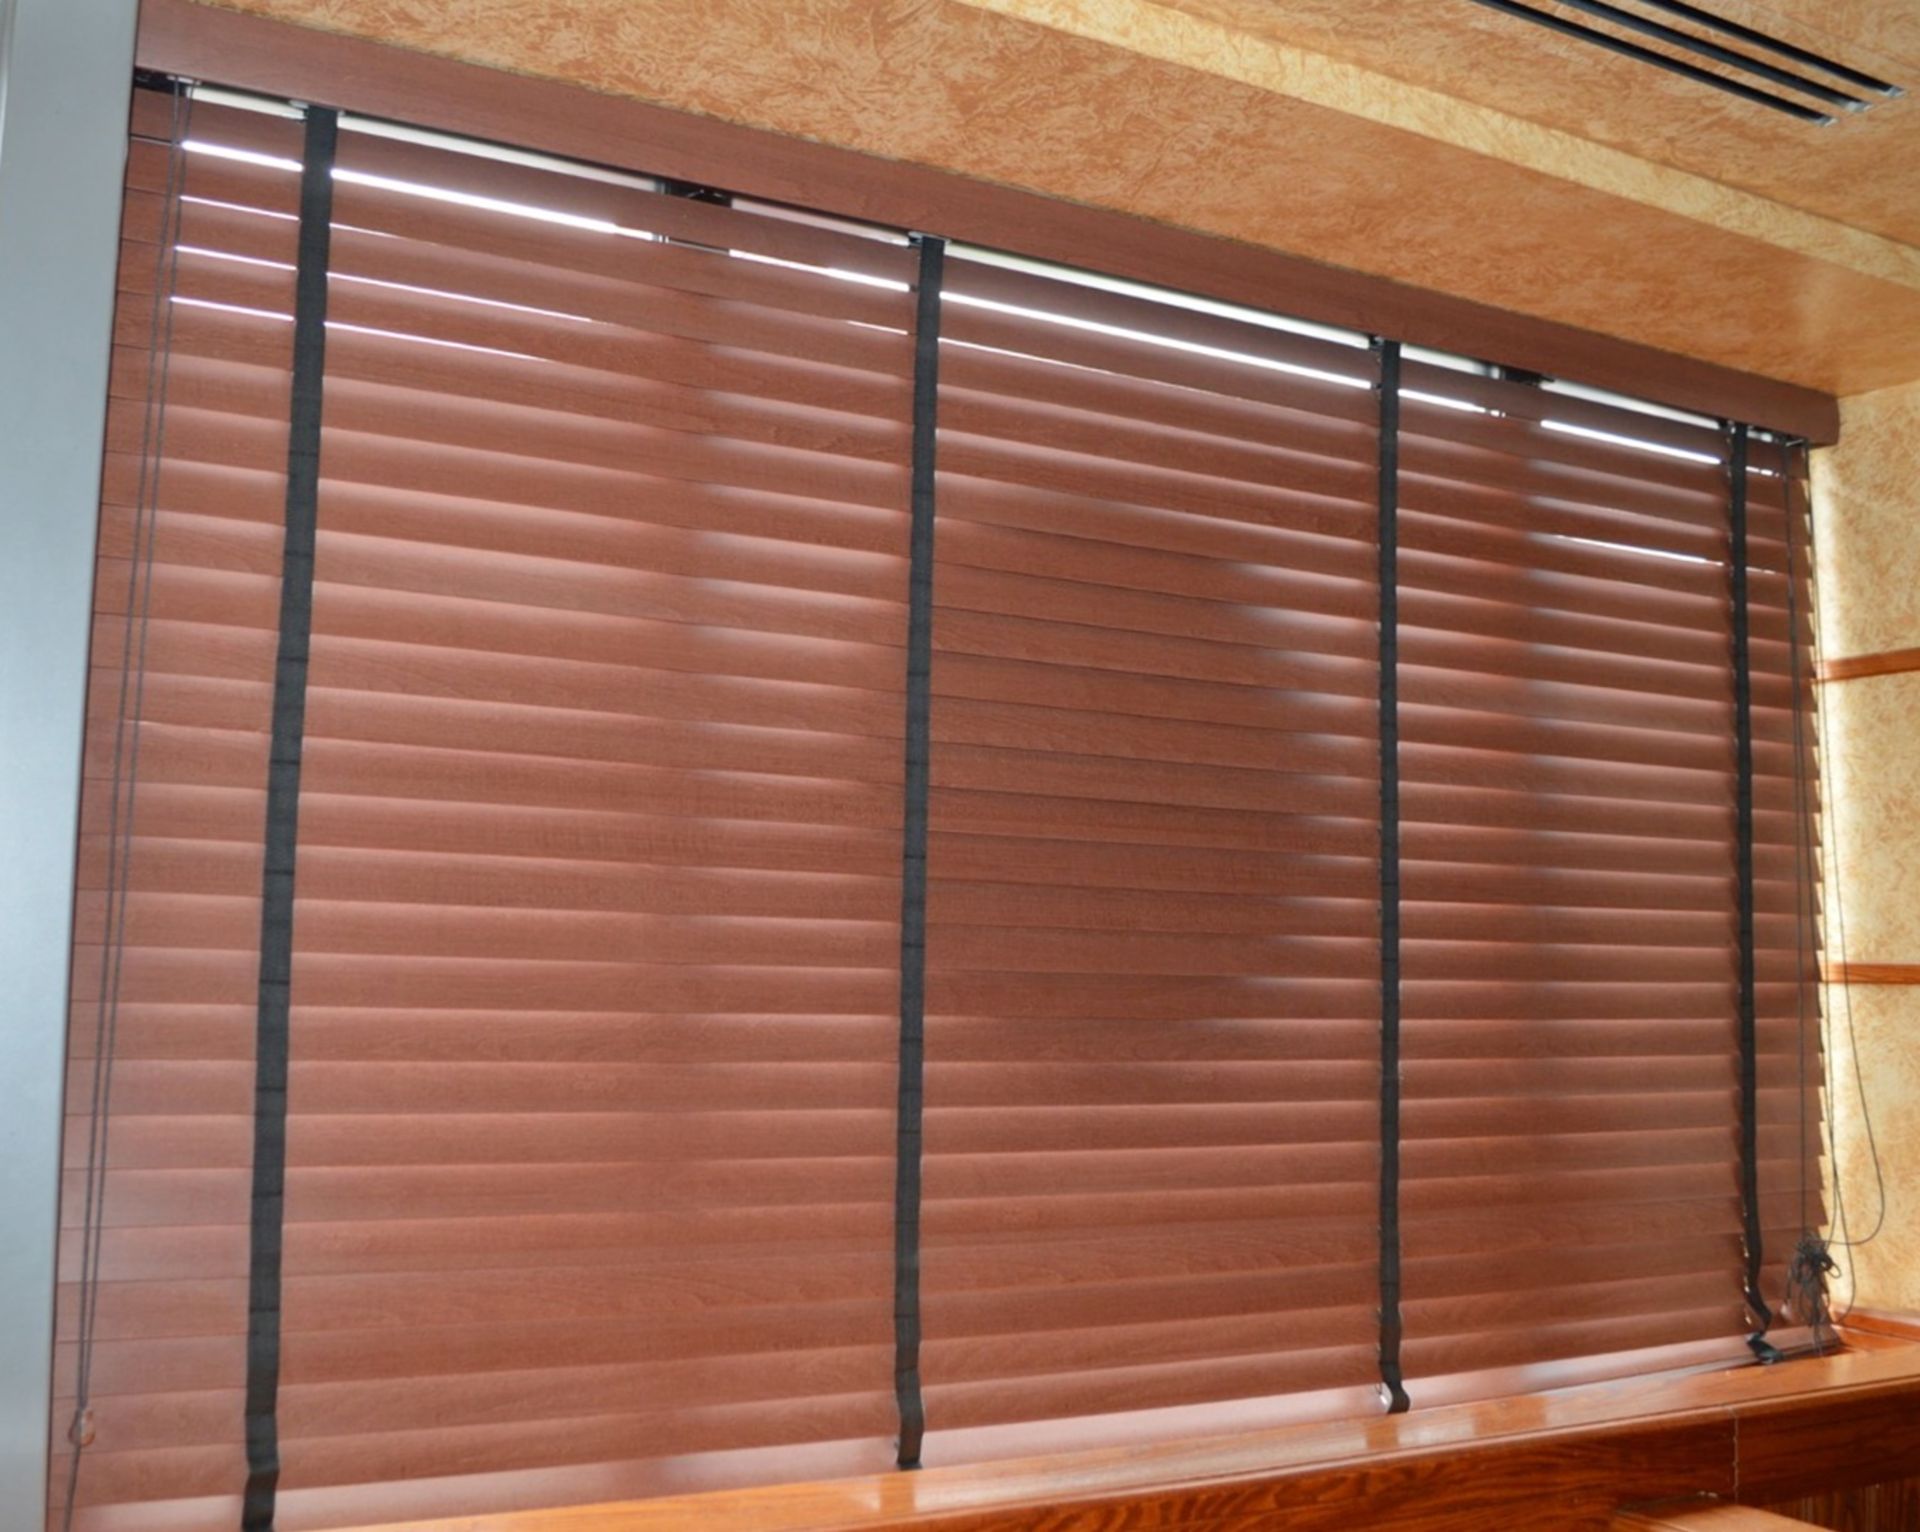 15 x Wooden Venetian Blinds - Various Sizes Included - CL357 - Location: Bolton BL1 Sizes Include: